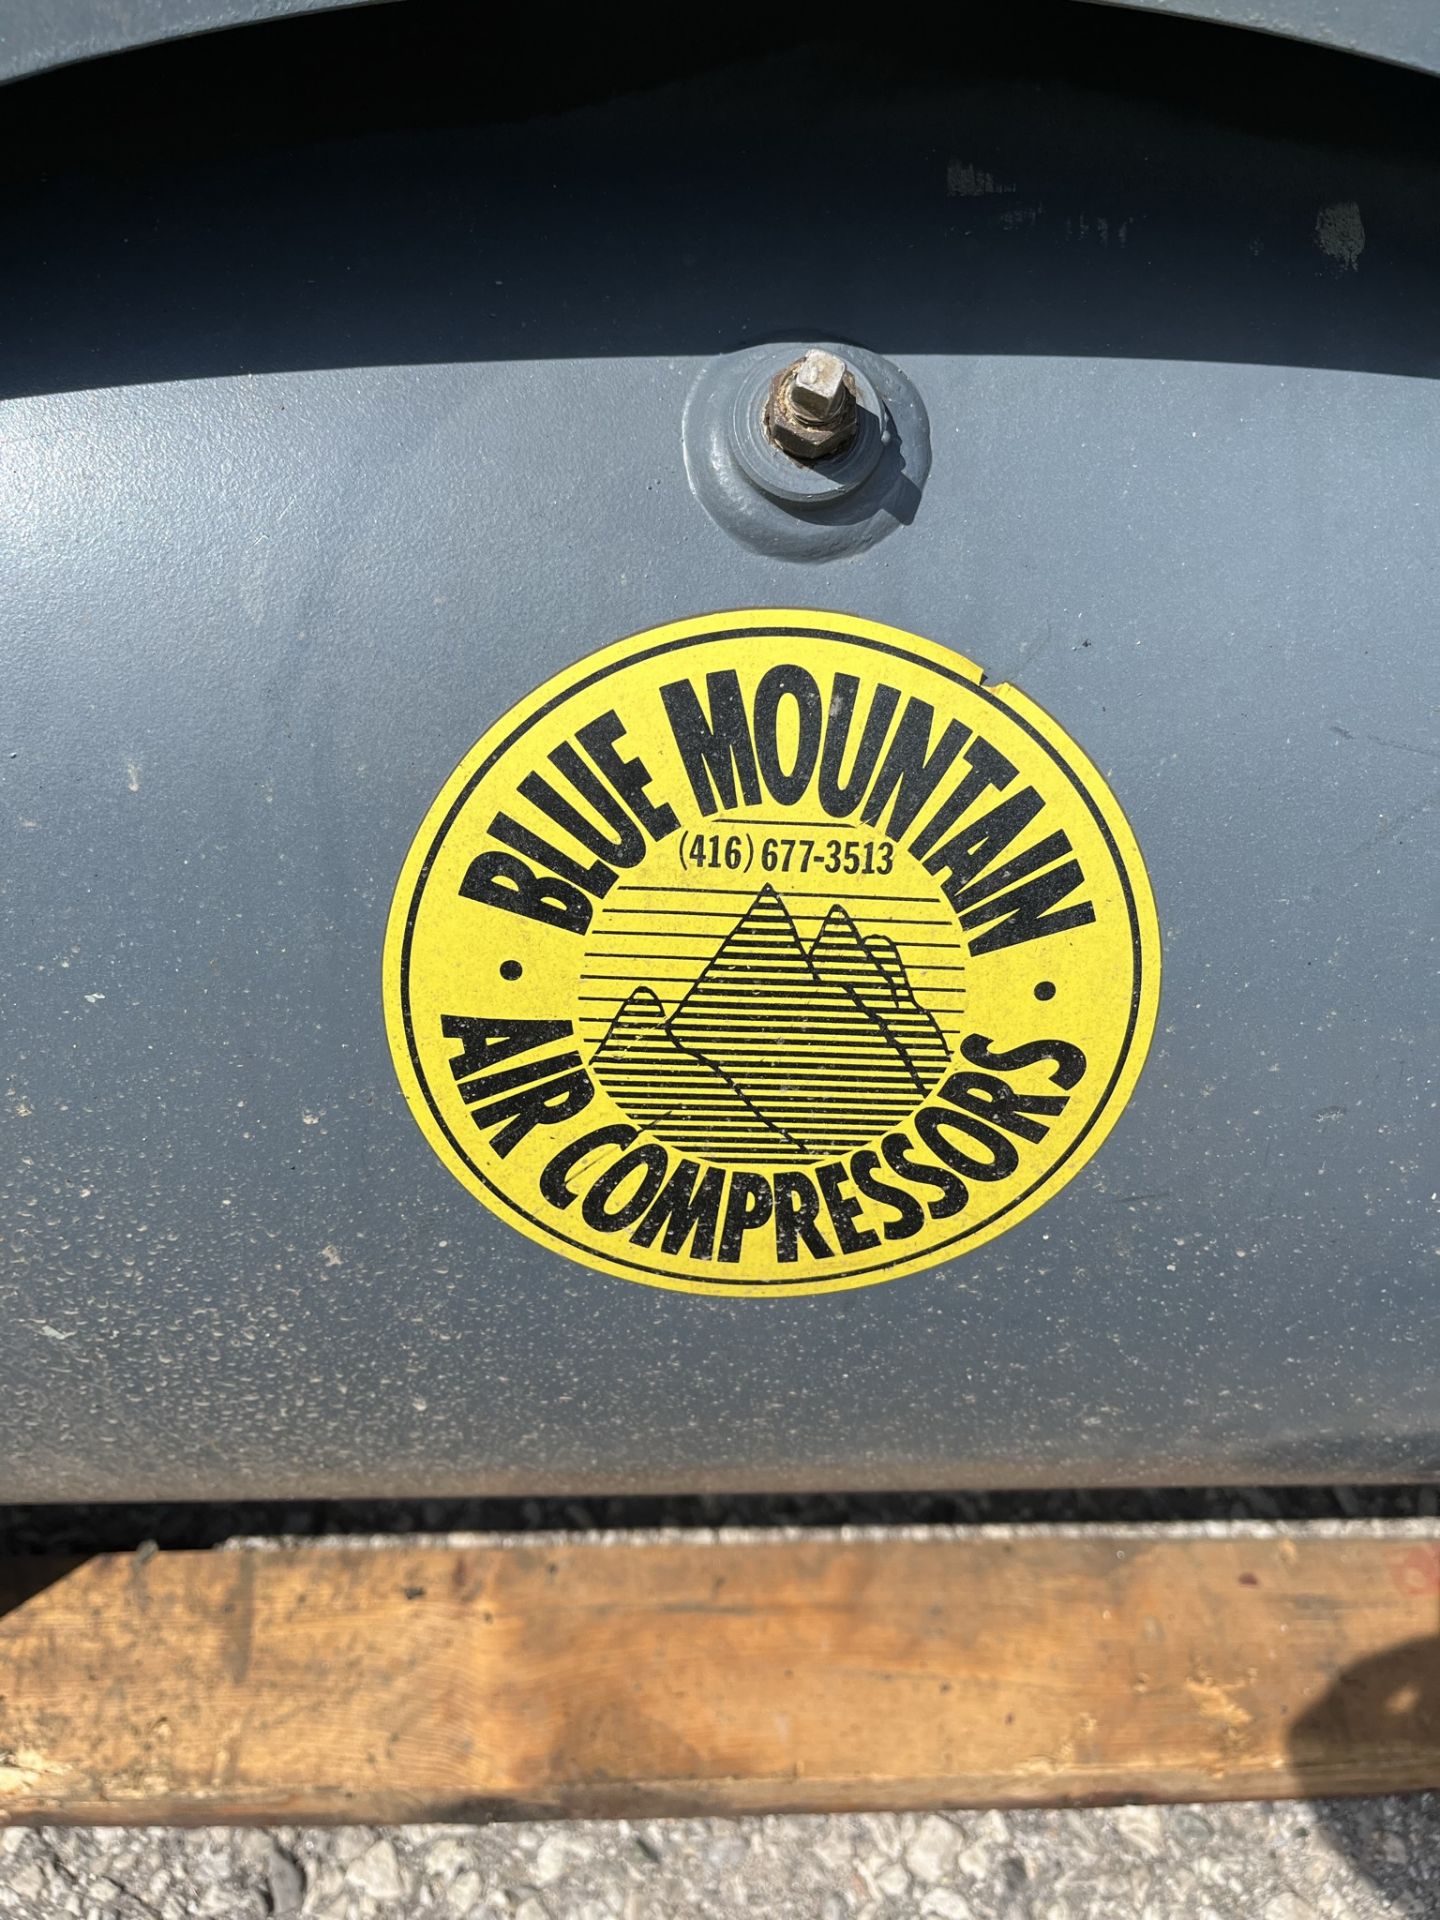 1986 Blue Mountain Air Compressor - Image 10 of 10